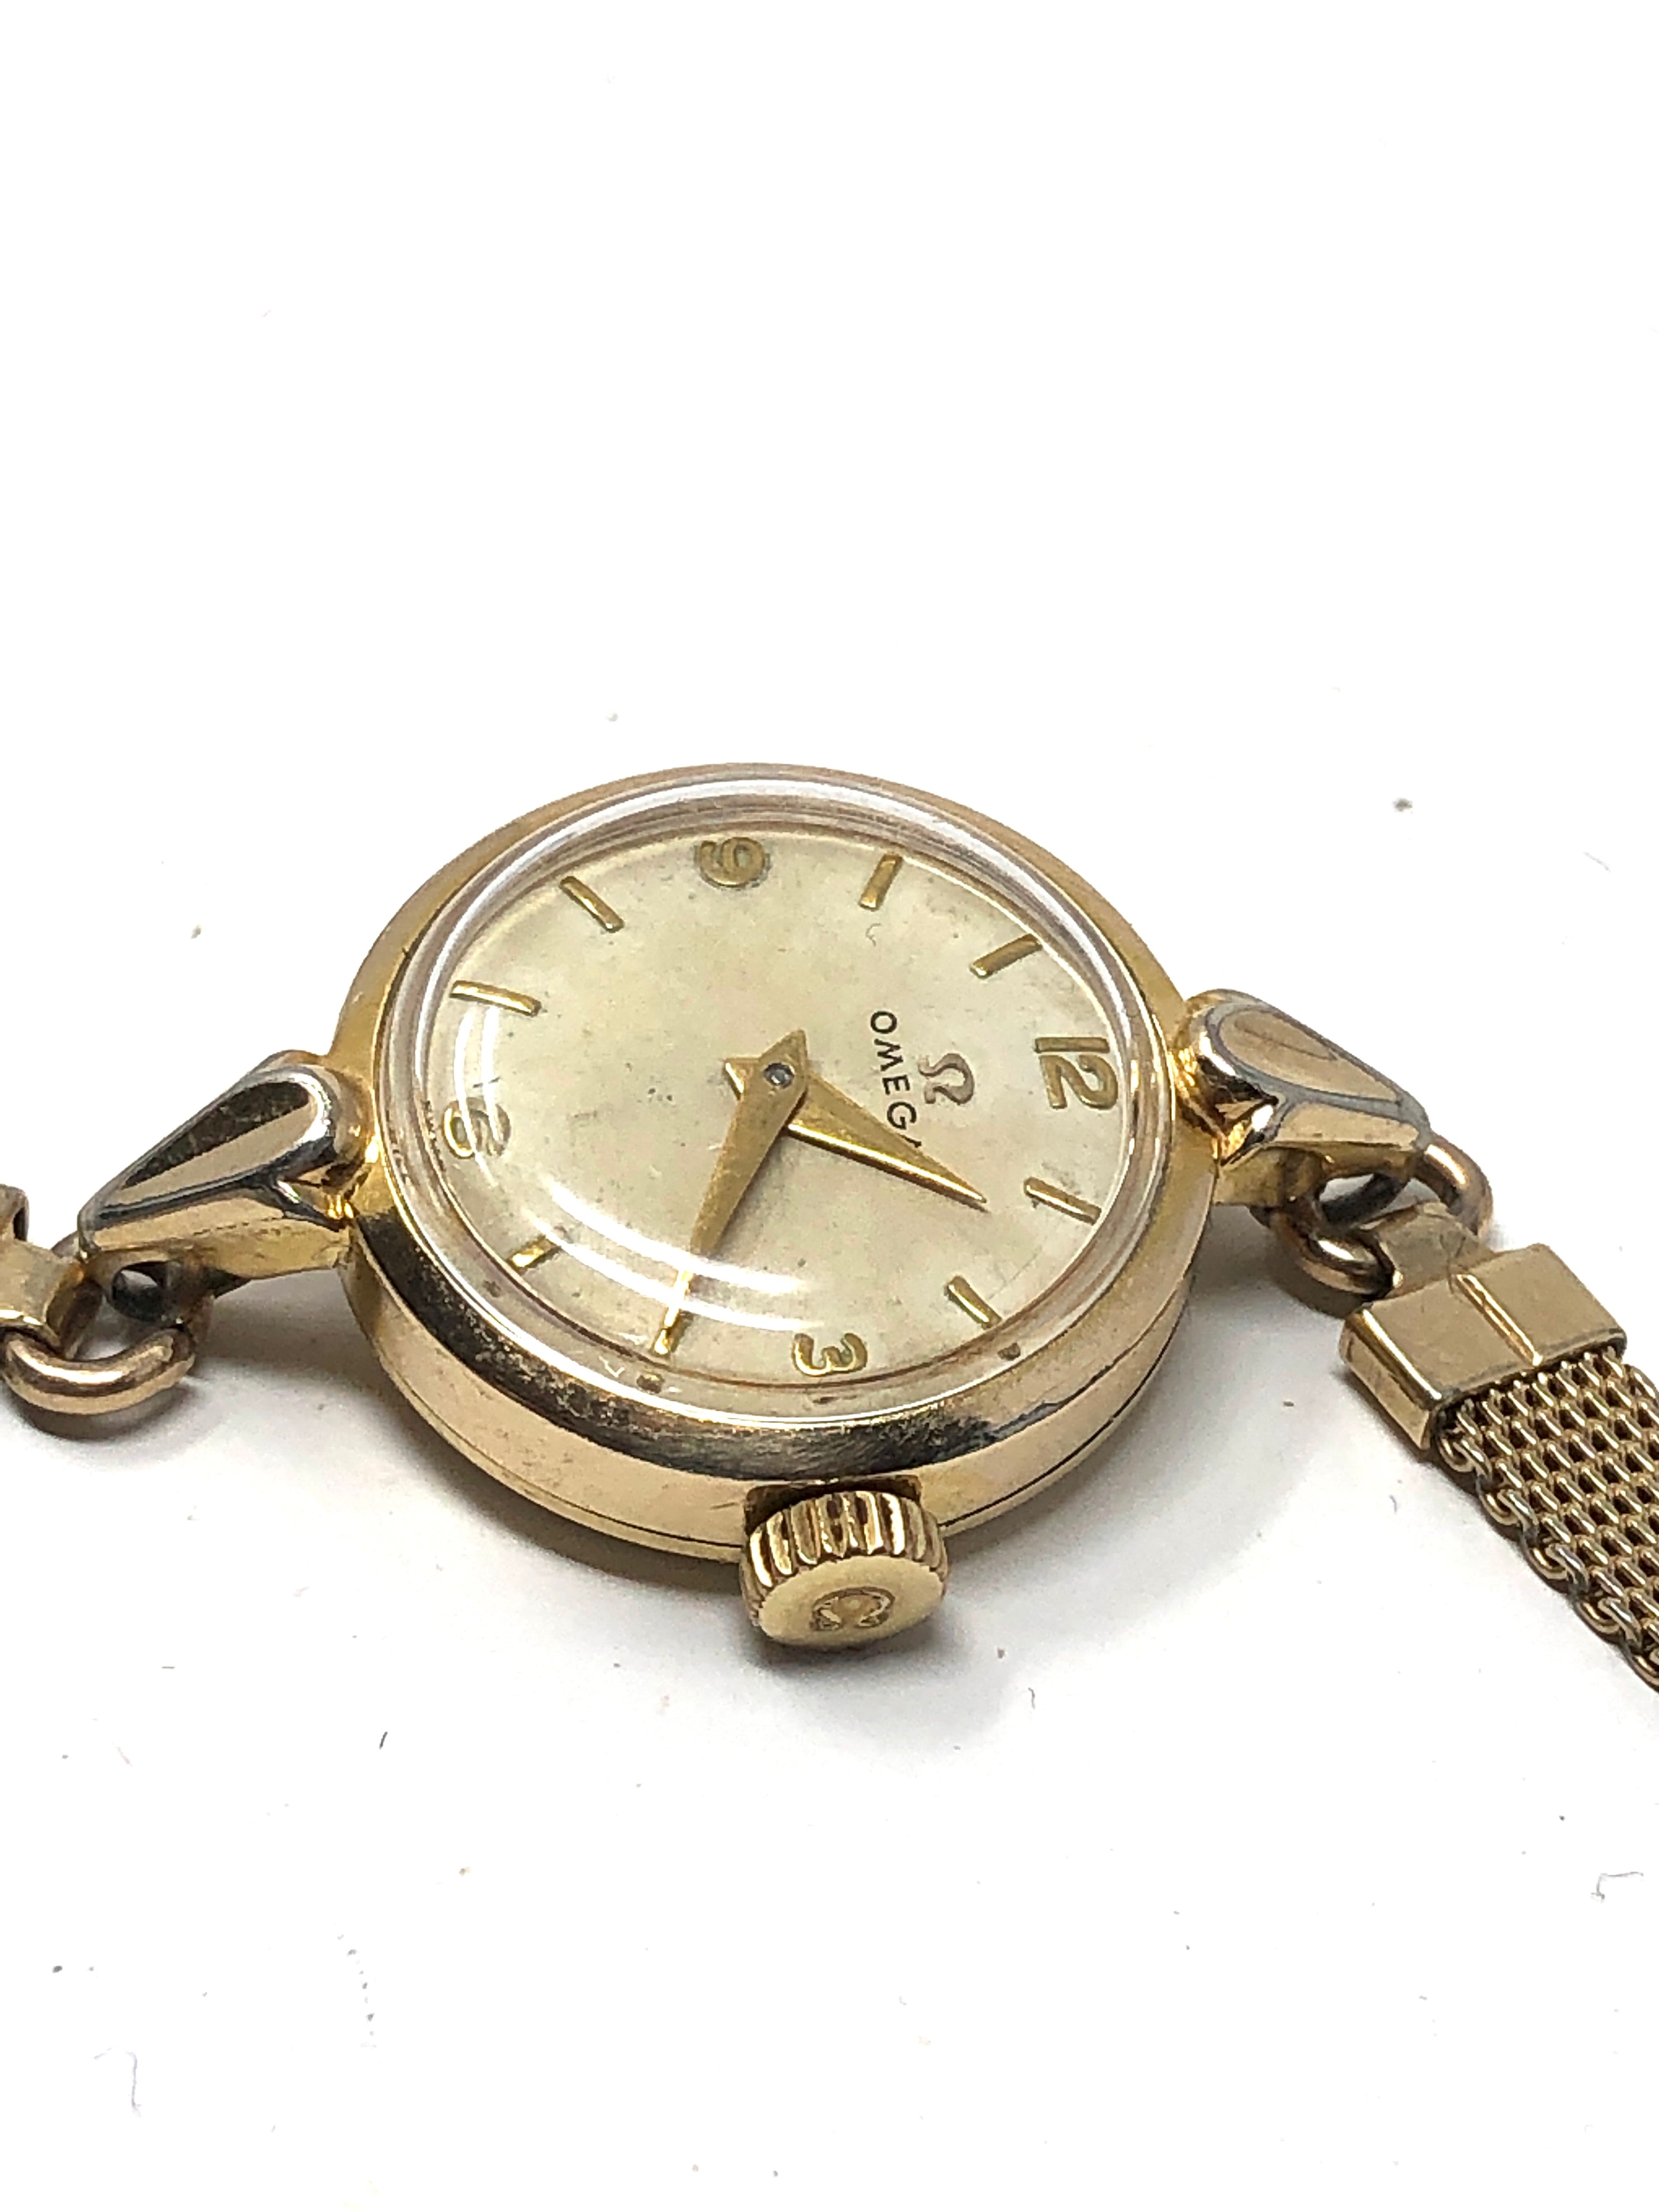 ladies gold plated omega wristwatch cal 244 the watch is ticking - Image 2 of 3